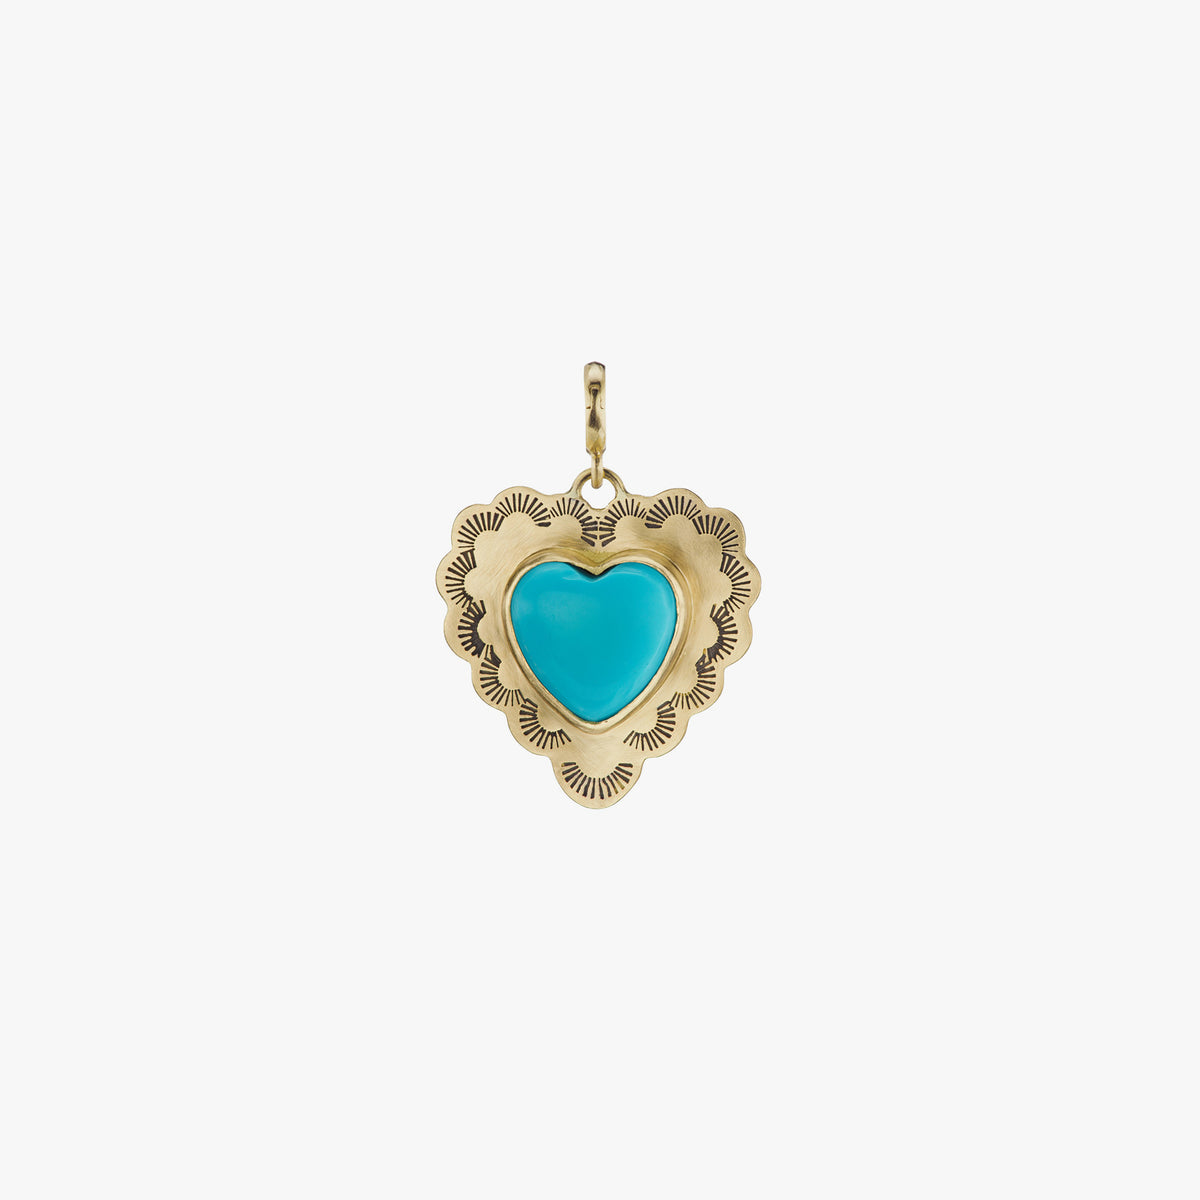 Large Heart Charm with Turquoise Heart